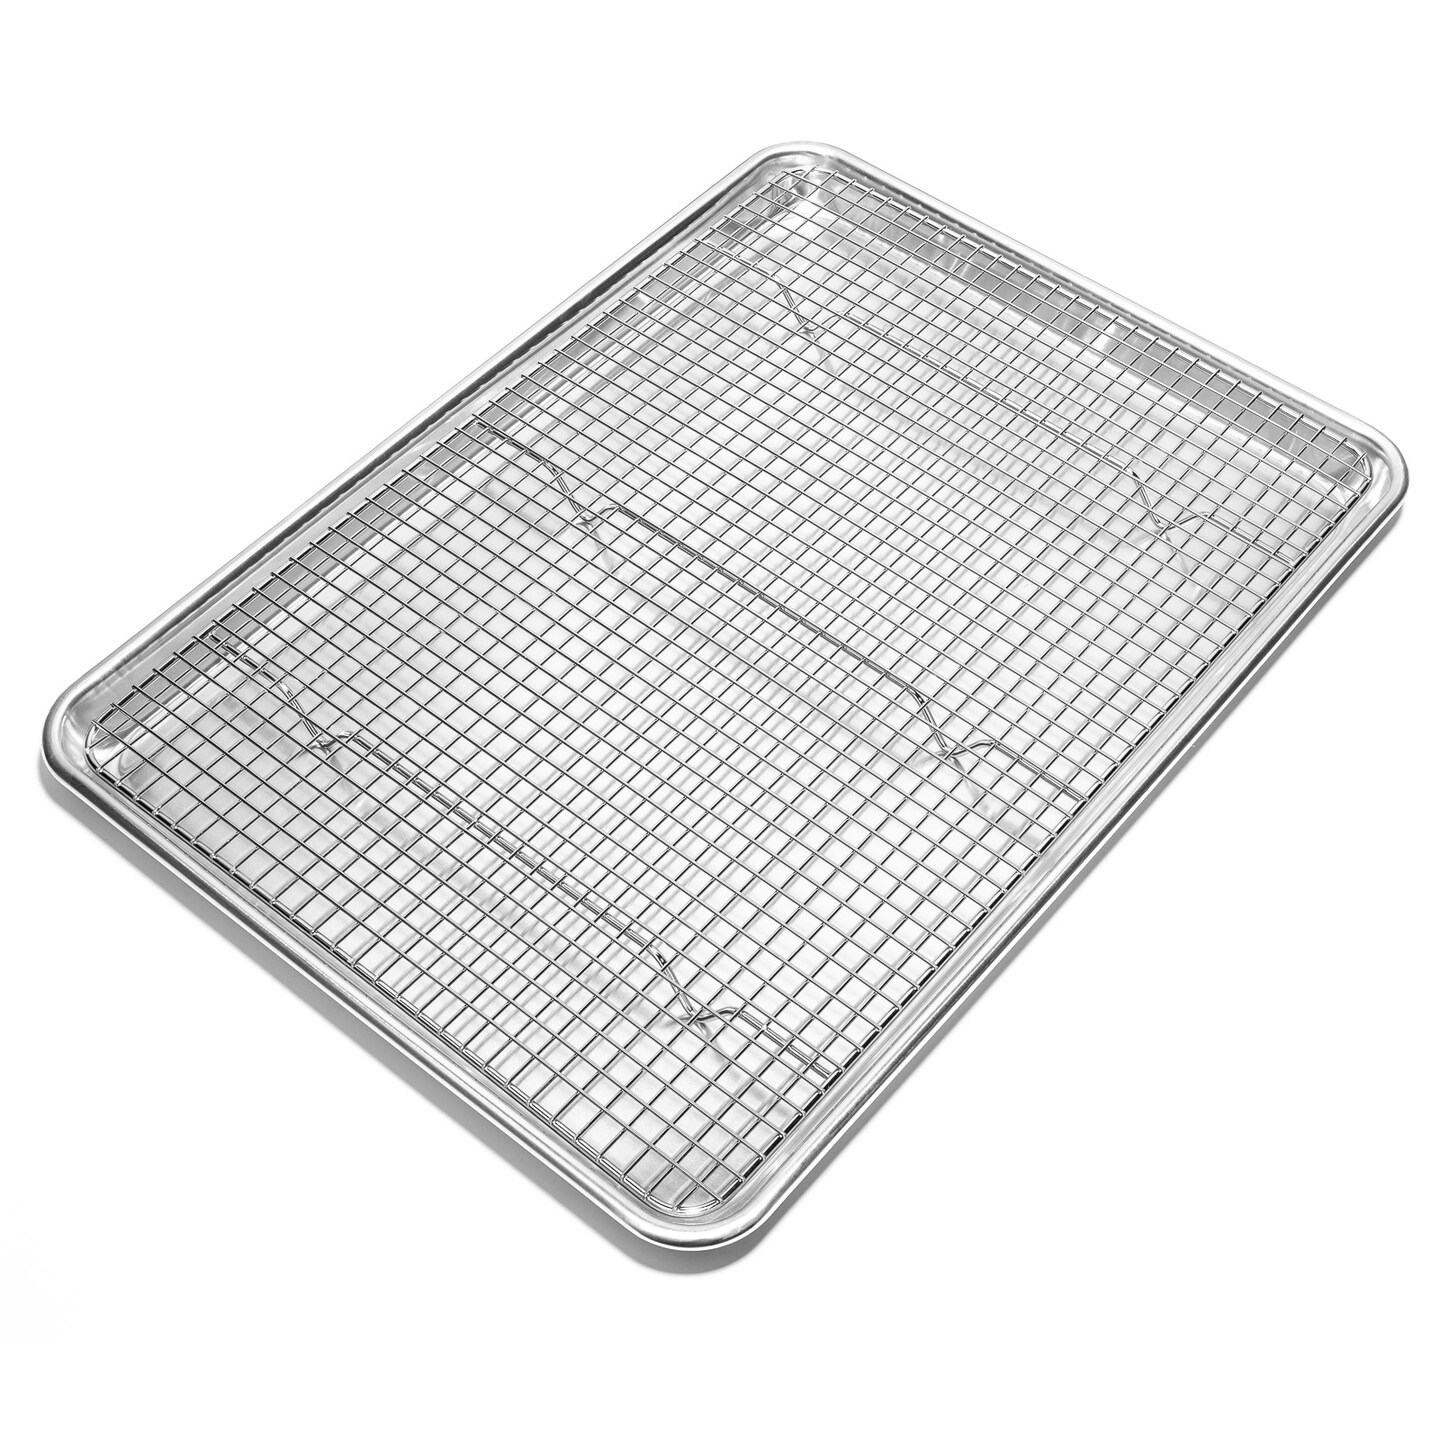 Cooling Rack and Baker's Rack for Kitchen Baking 8.5 x 9.2 - 2 Pack